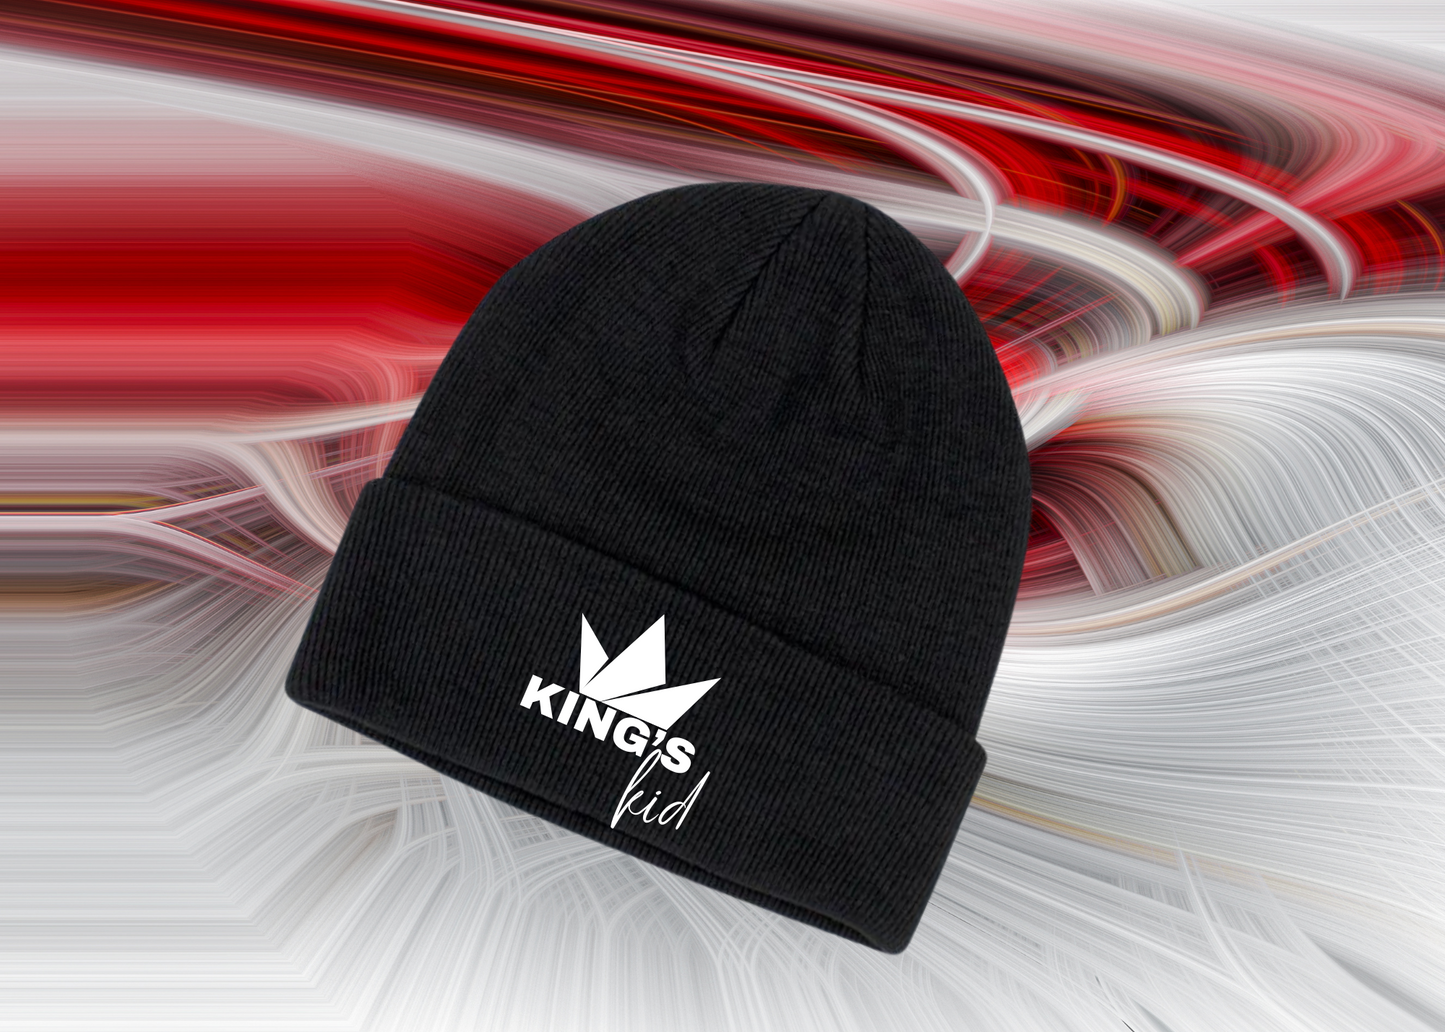 KING’S kid Beanie (Embroidered)